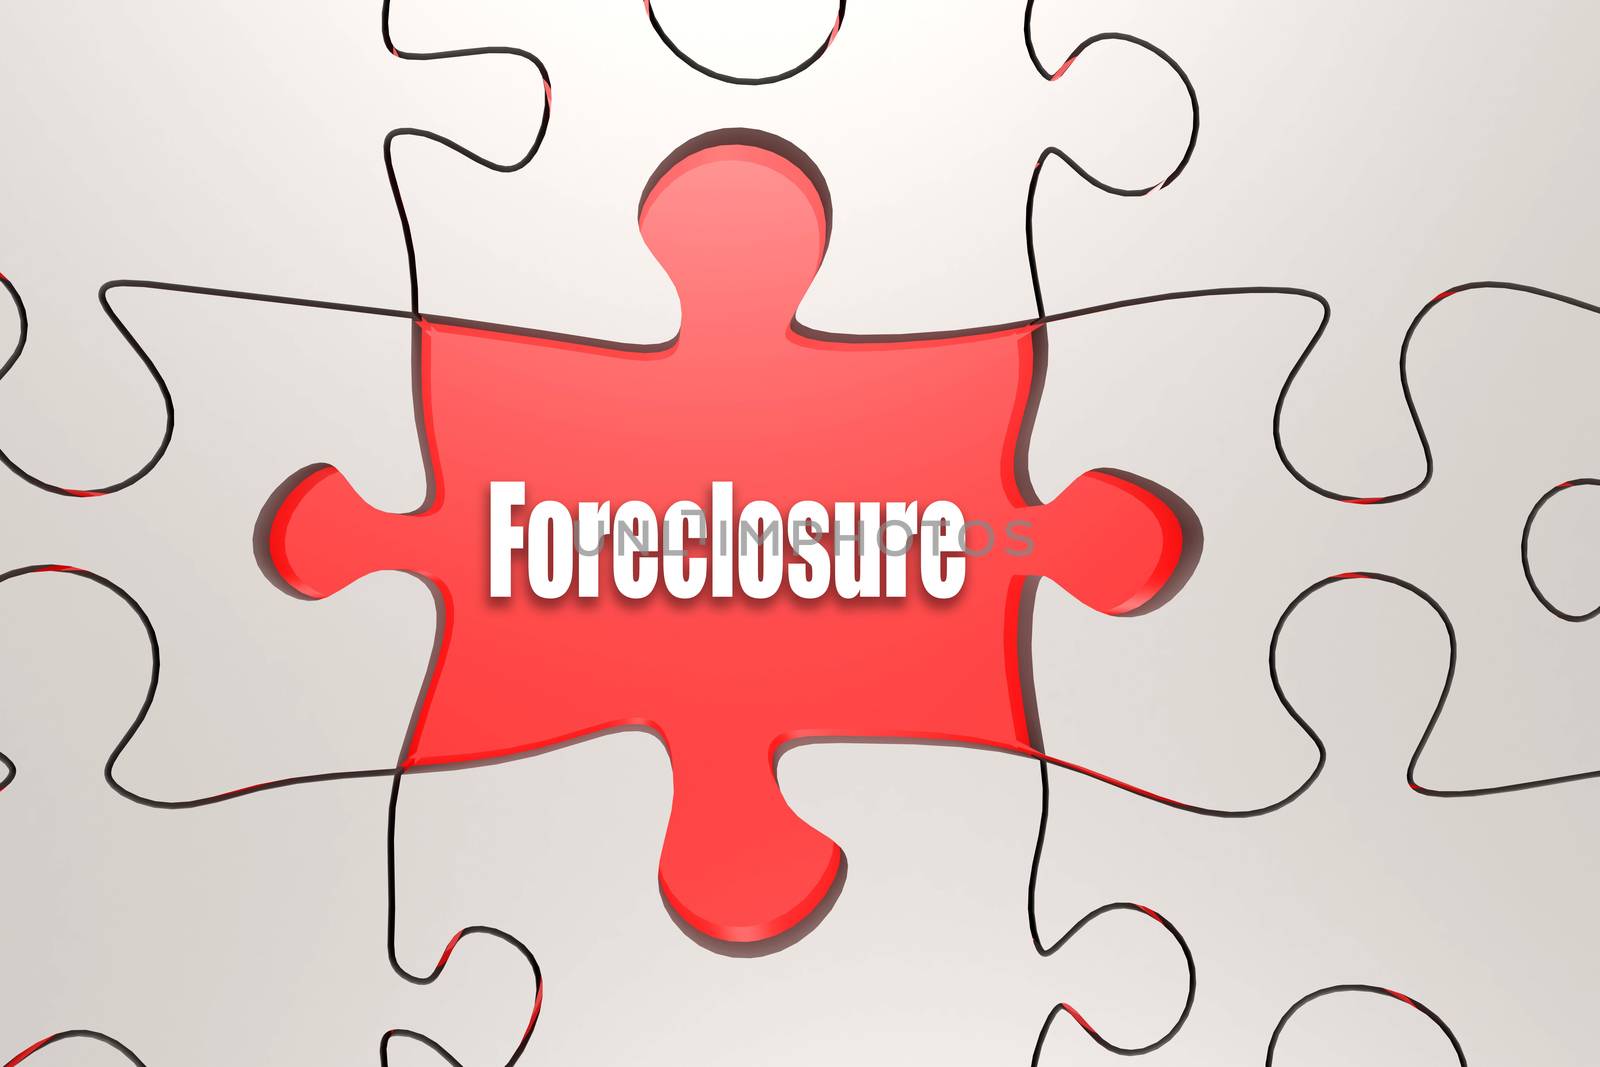 Foreclosure word on jigsaw puzzle, 3D rendering